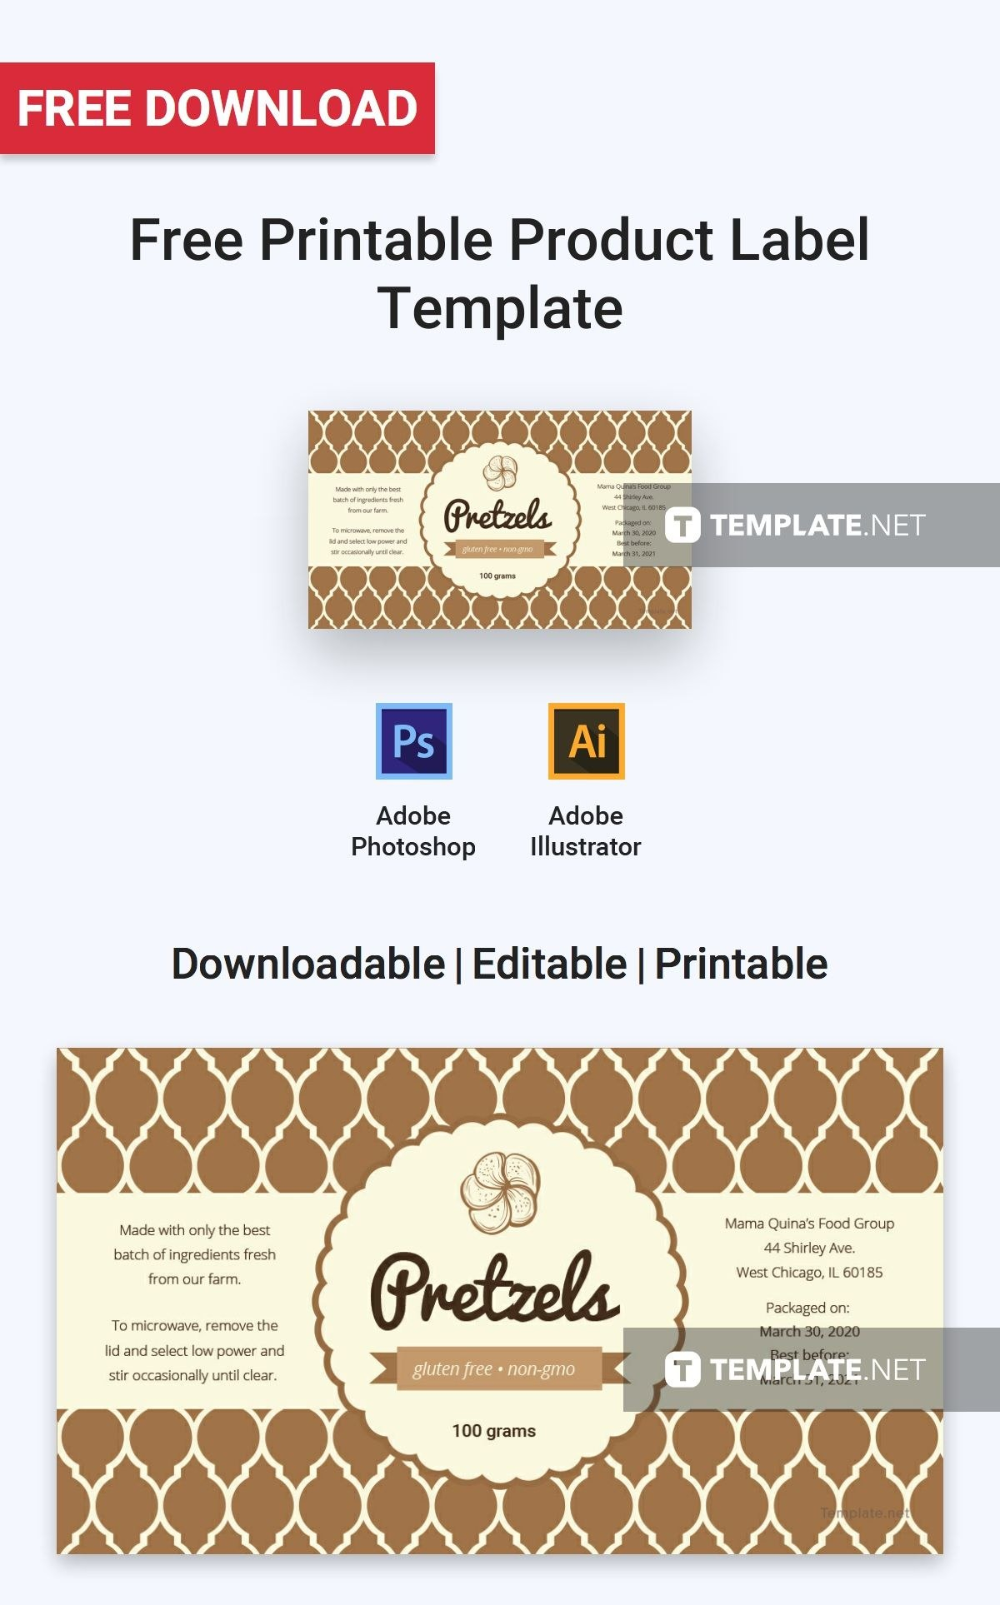 Free Printable Product Label Label Templates Designs With Food Product